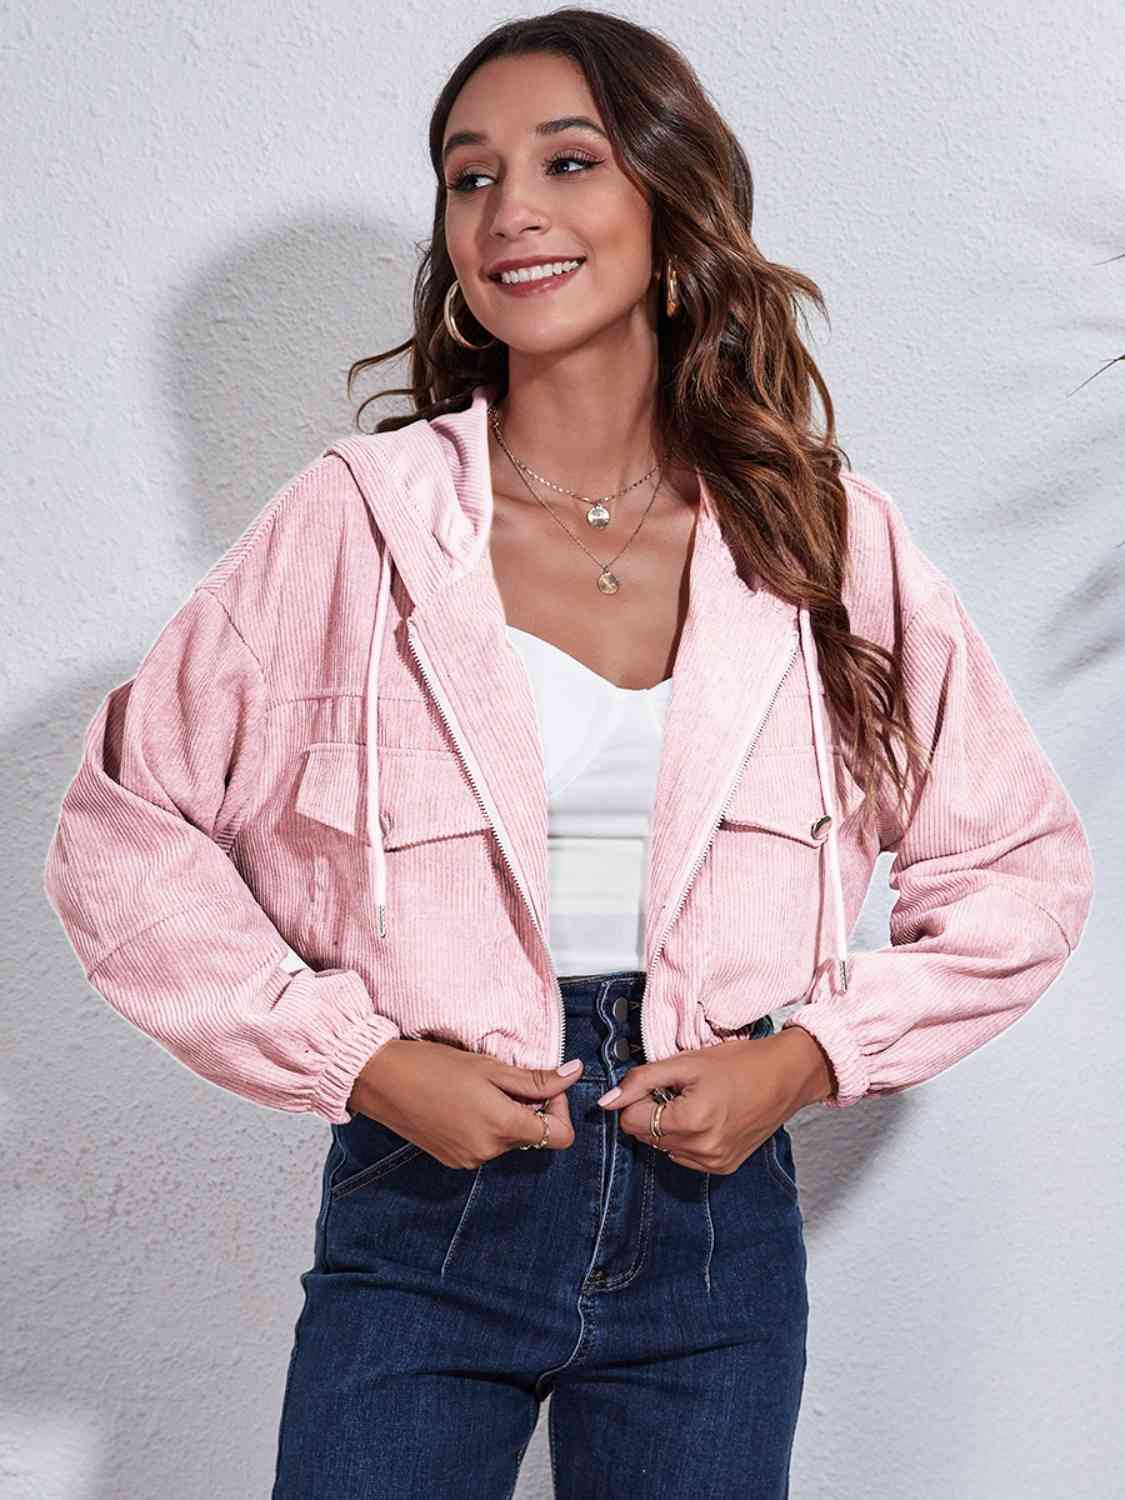 Drawstring Hooded Zip Up Jacket with Pockets - Pink / S - Jackets & Coats - Coats & Jackets - 9 - 2024